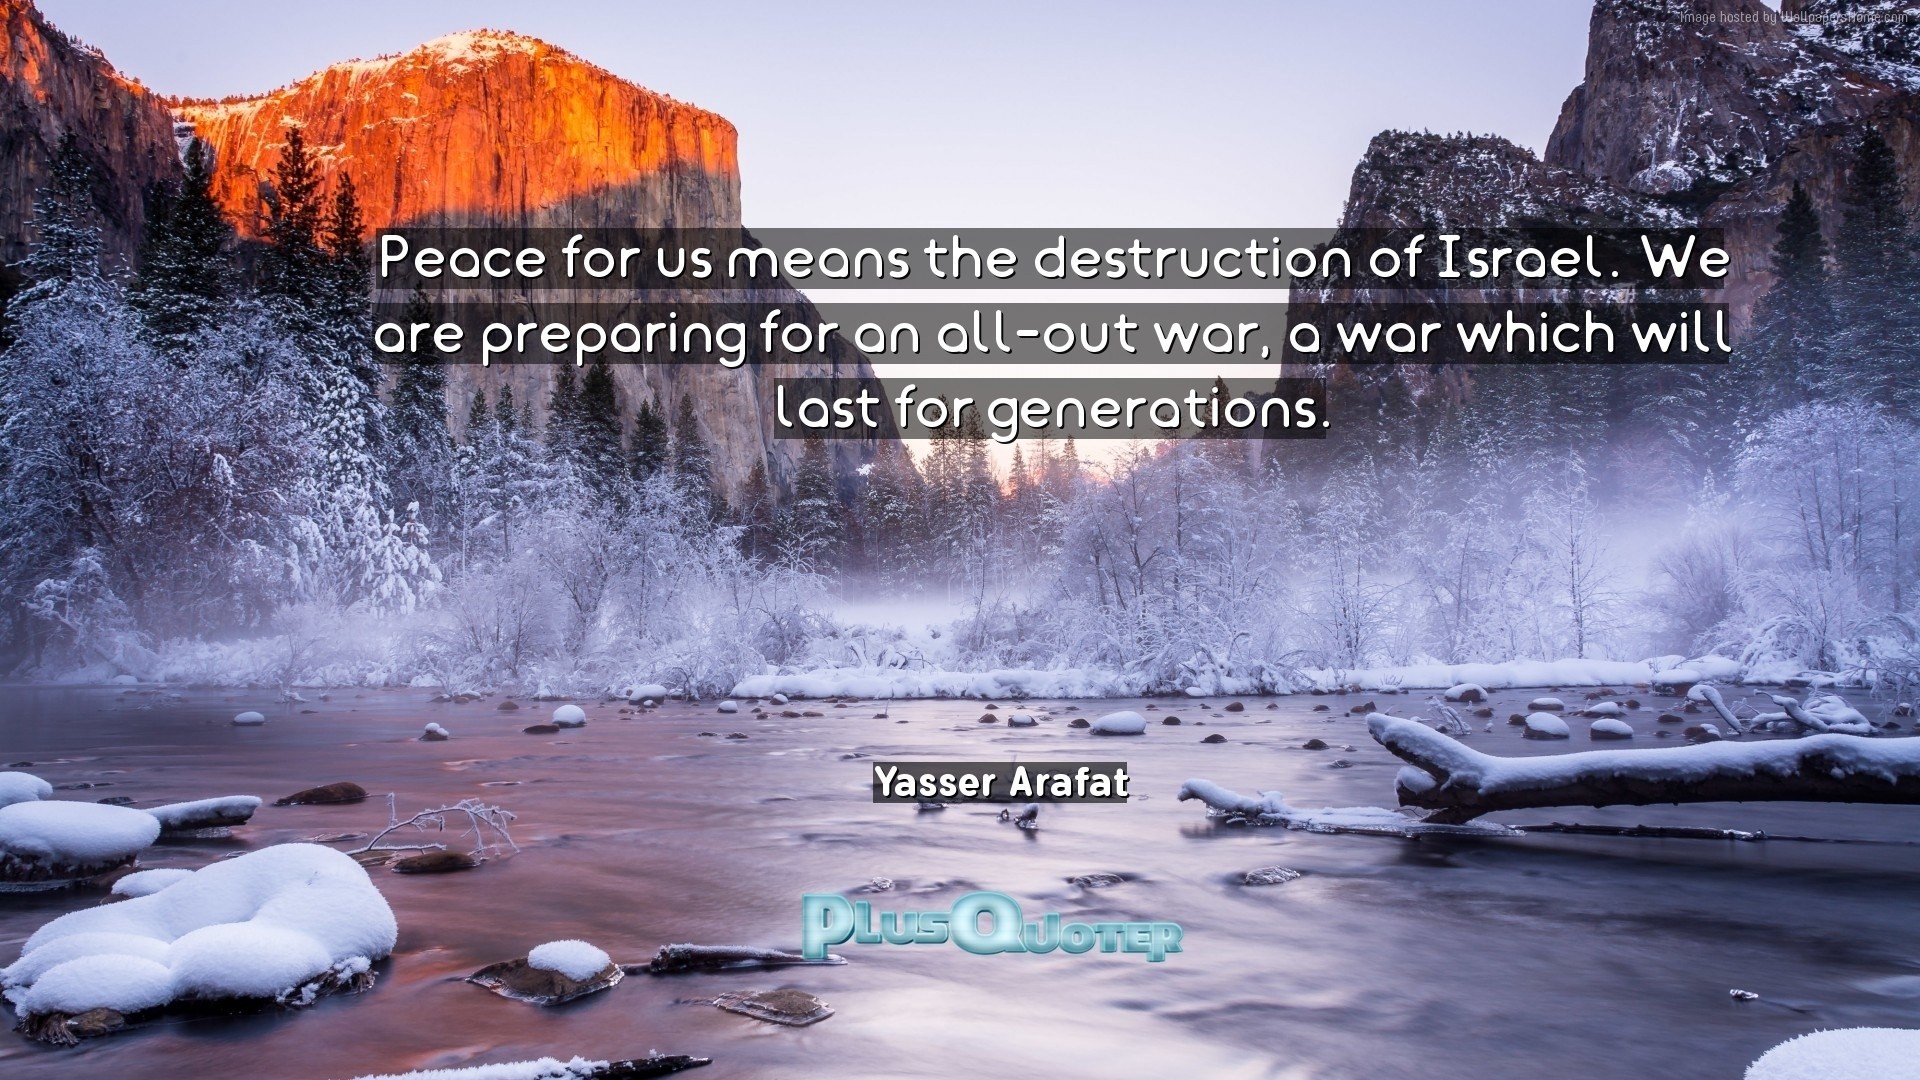 1920x1080 Download Wallpaper with inspirational Quotes- "Peace for us means the  destruction of Israel.